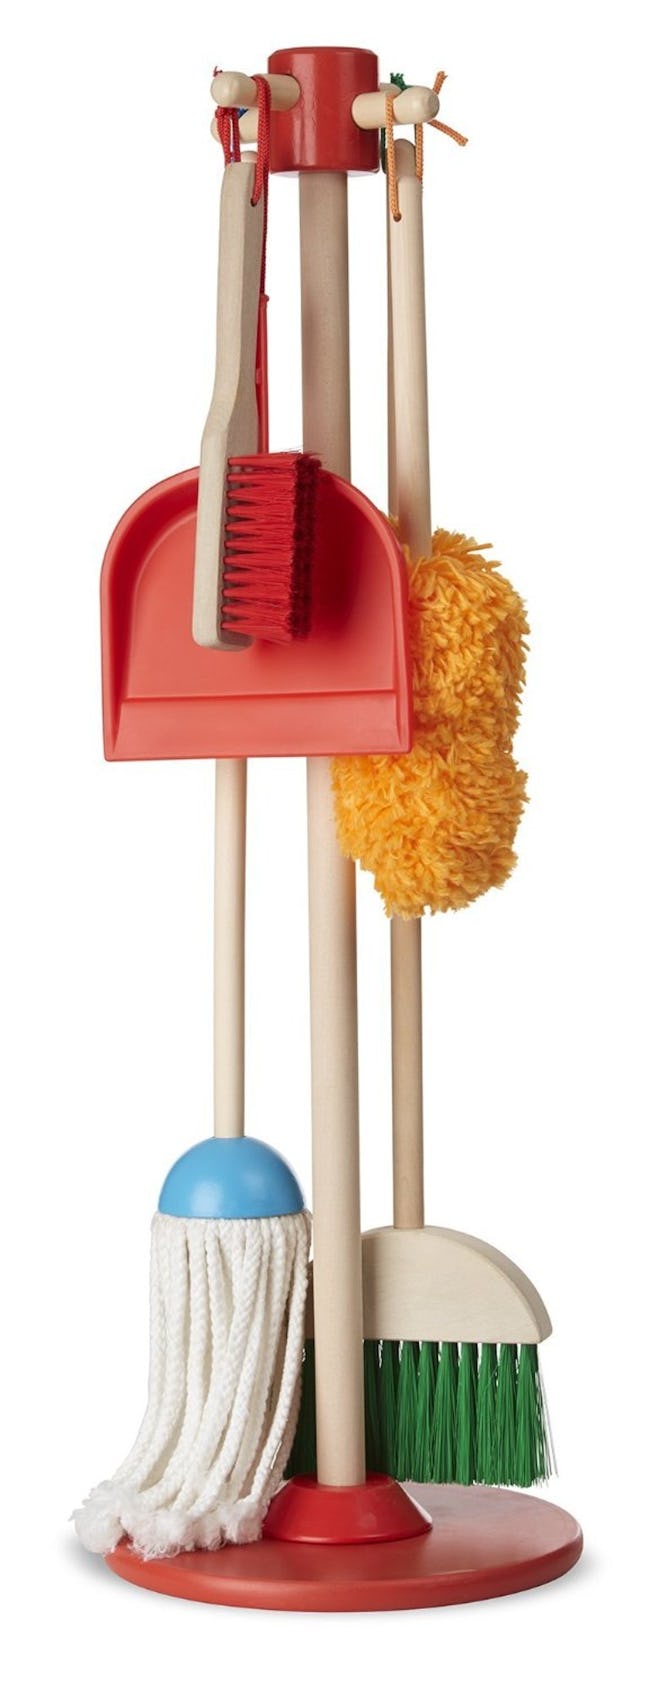 Melissa & Doug Let's Play House! Dust, Sweep and Mop